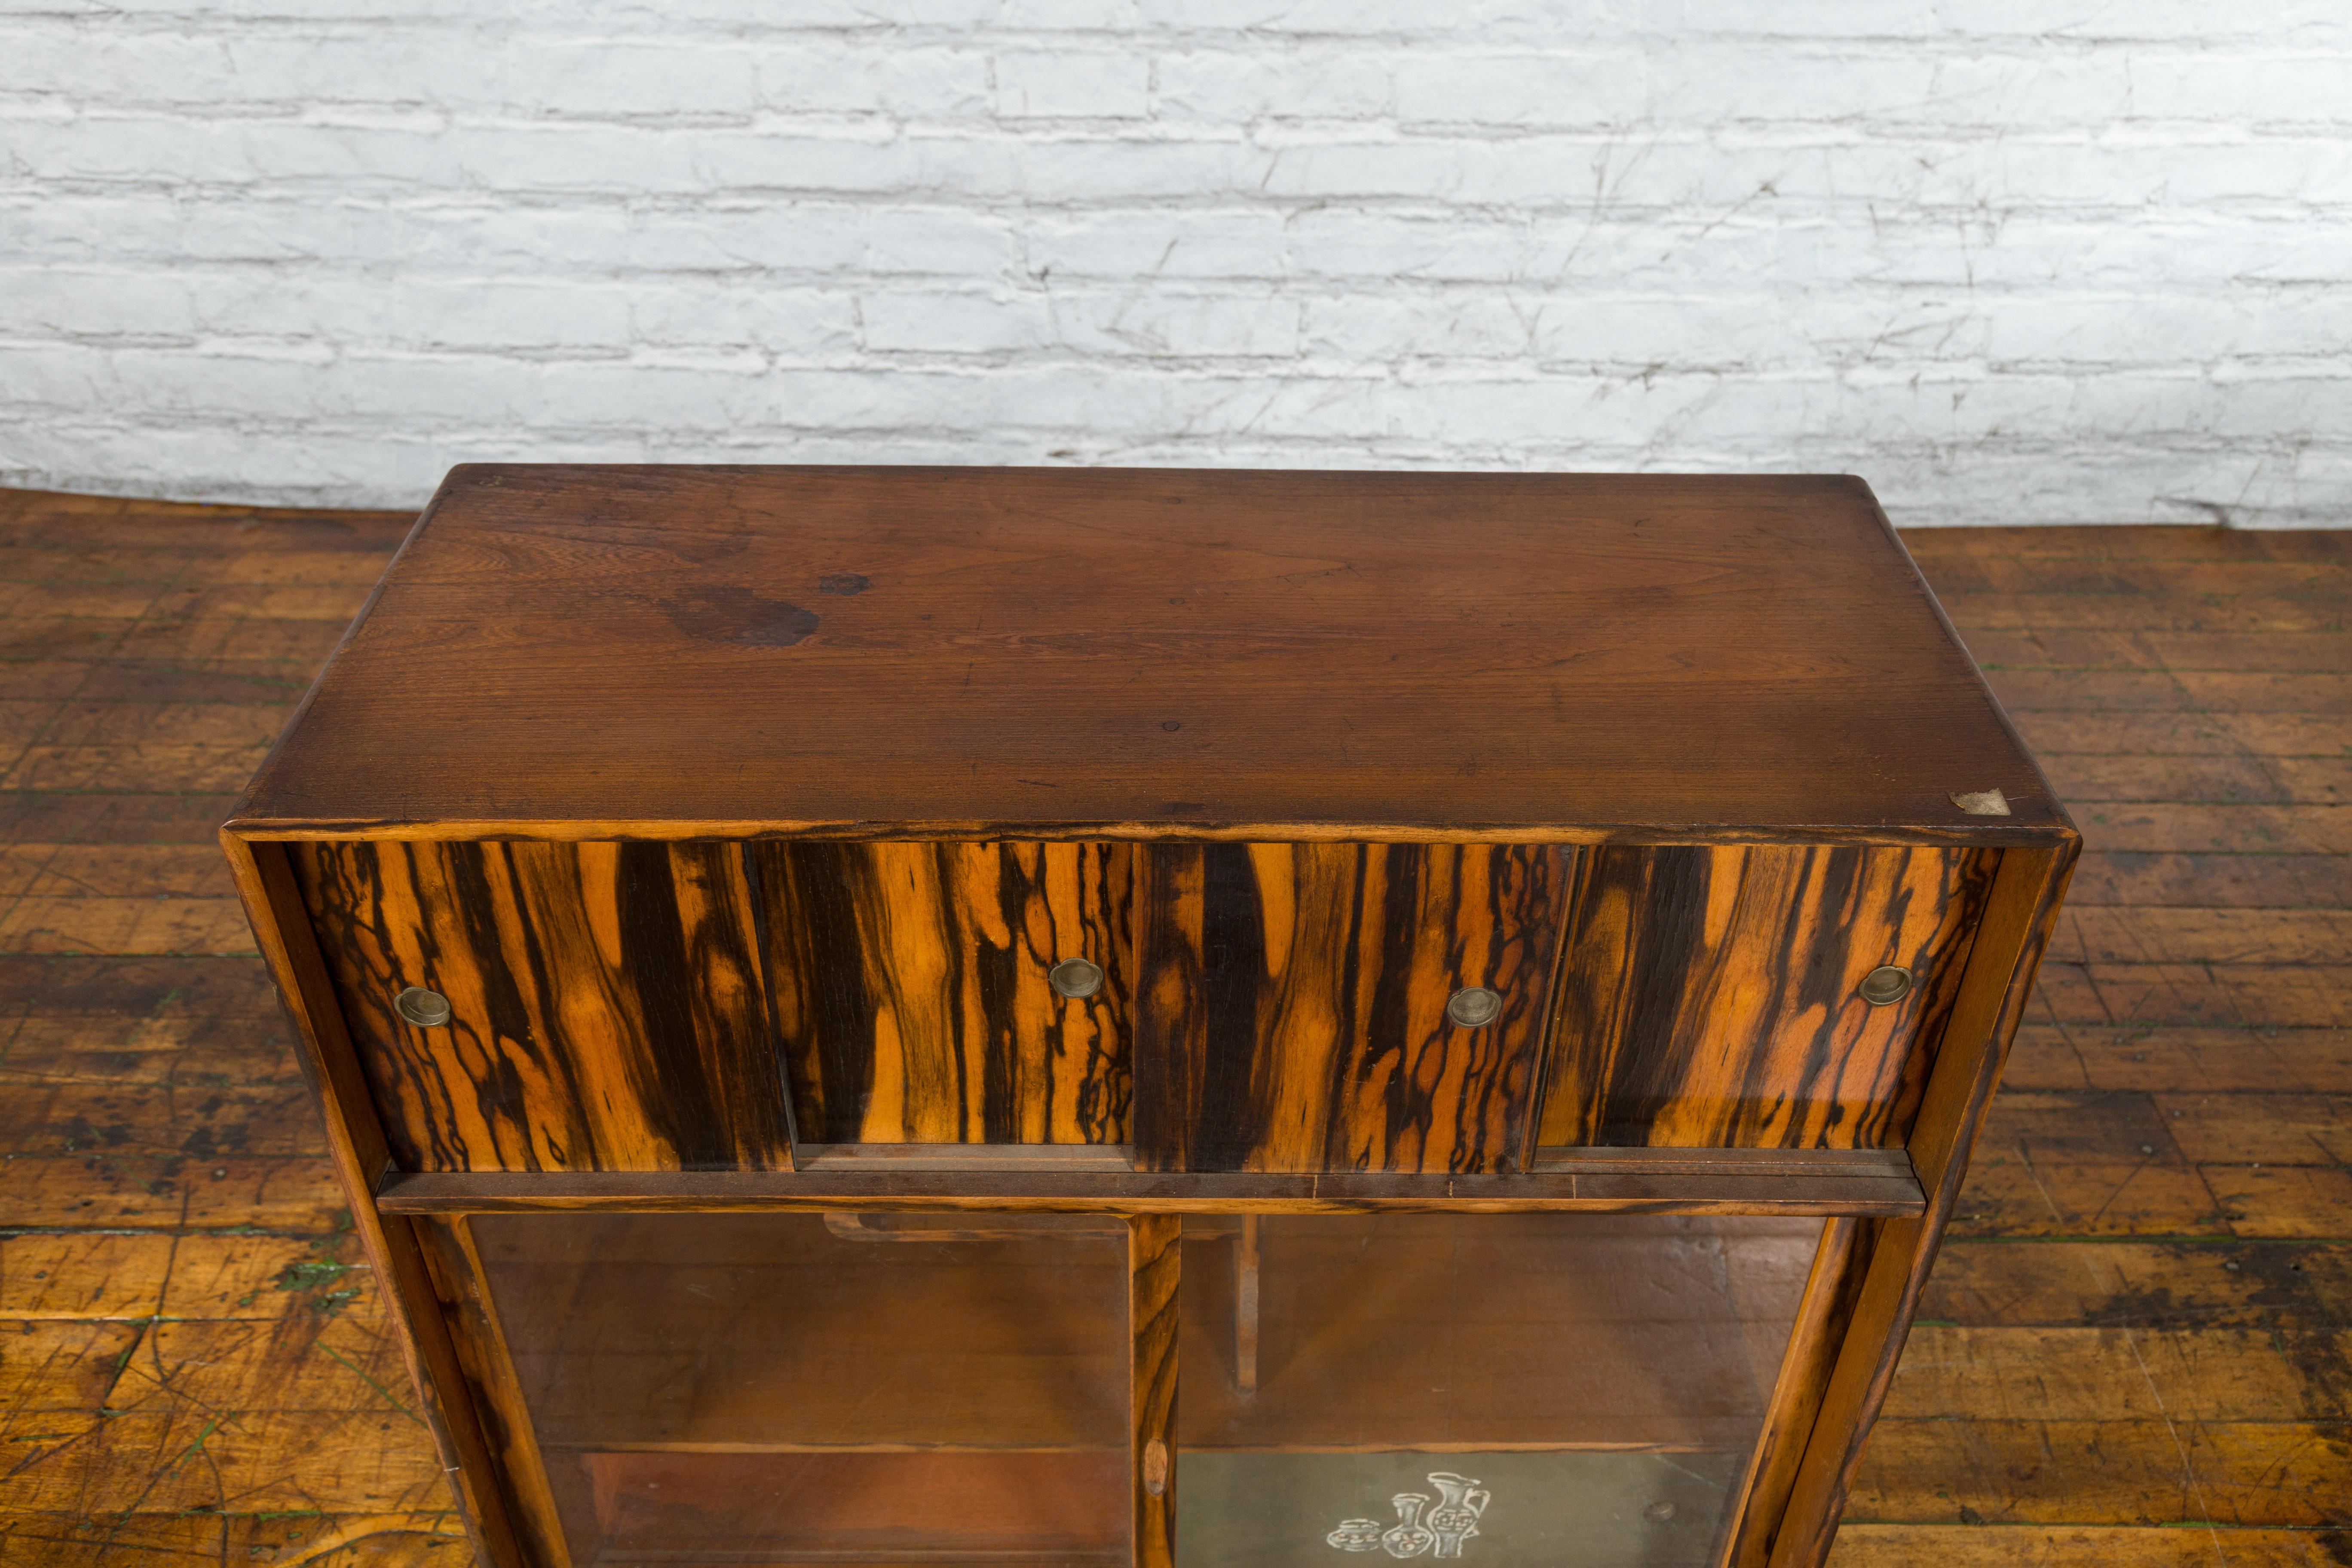 Japanese 19th Century Zebra Wood Tansu Chest with Sliding Doors and Open Shelves For Sale 7